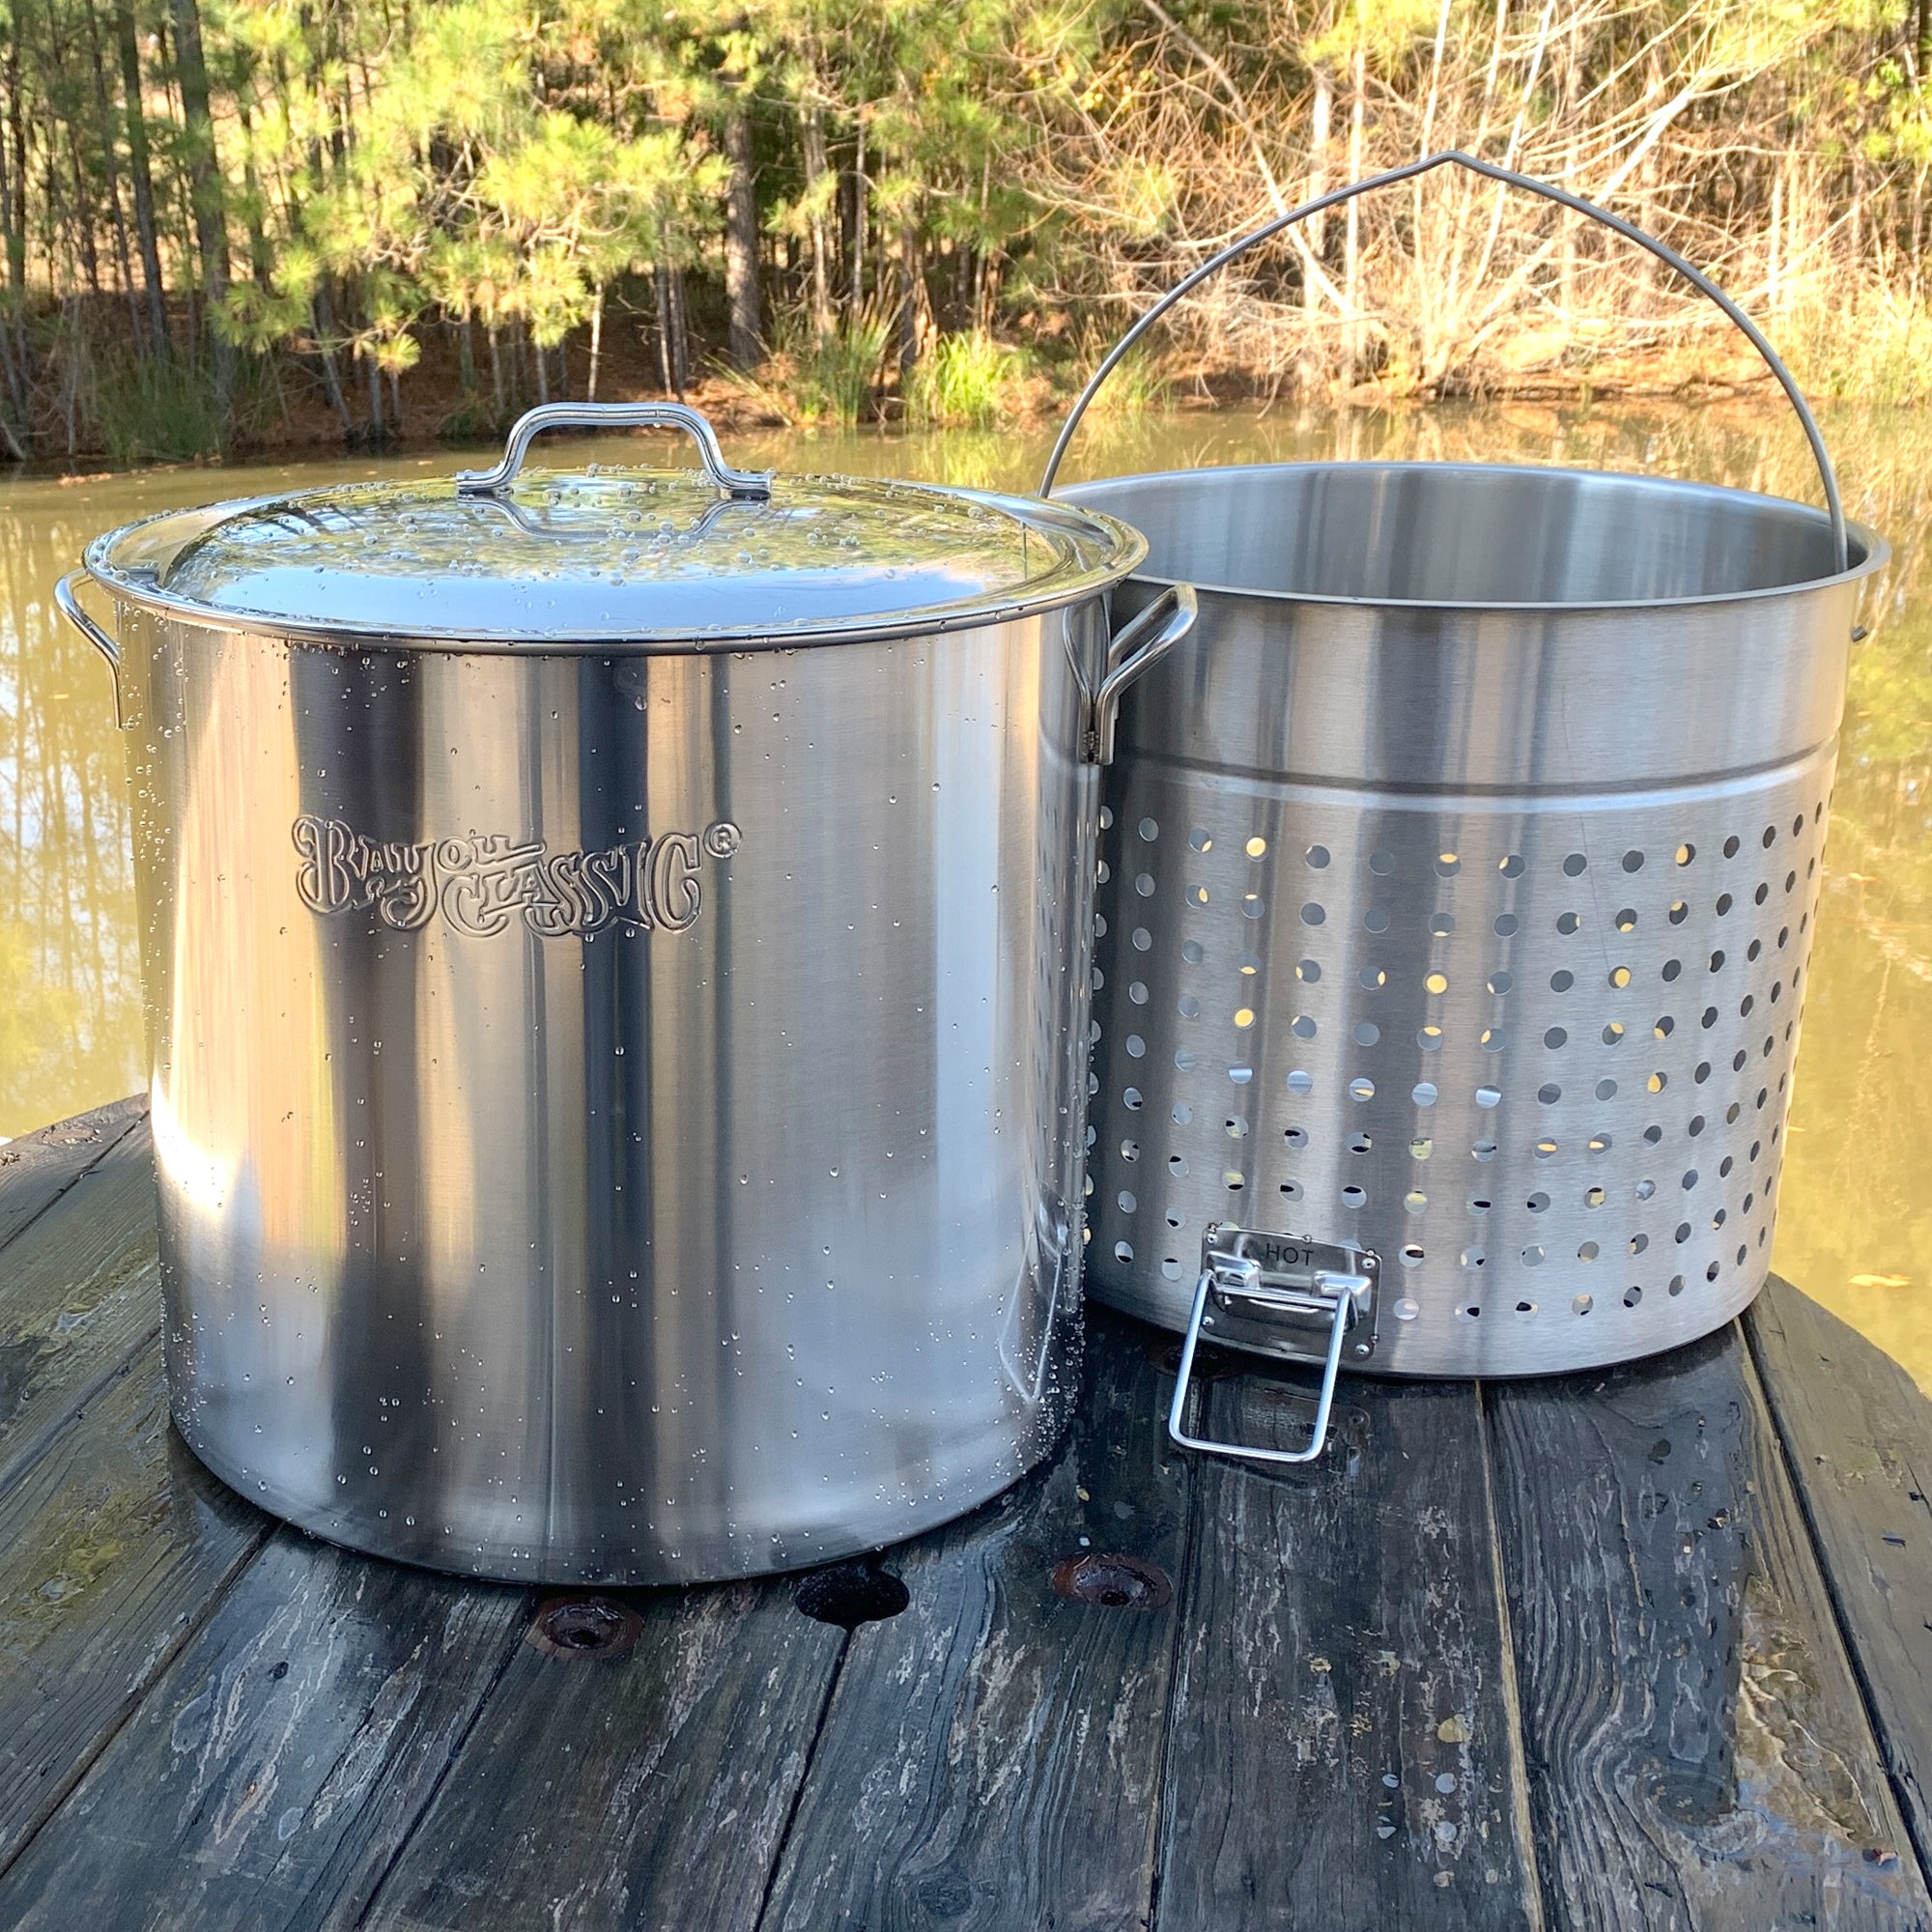 Bayou Classic Stockpot With Lid and Basket, Silver Stainless Steel, 82 Quart